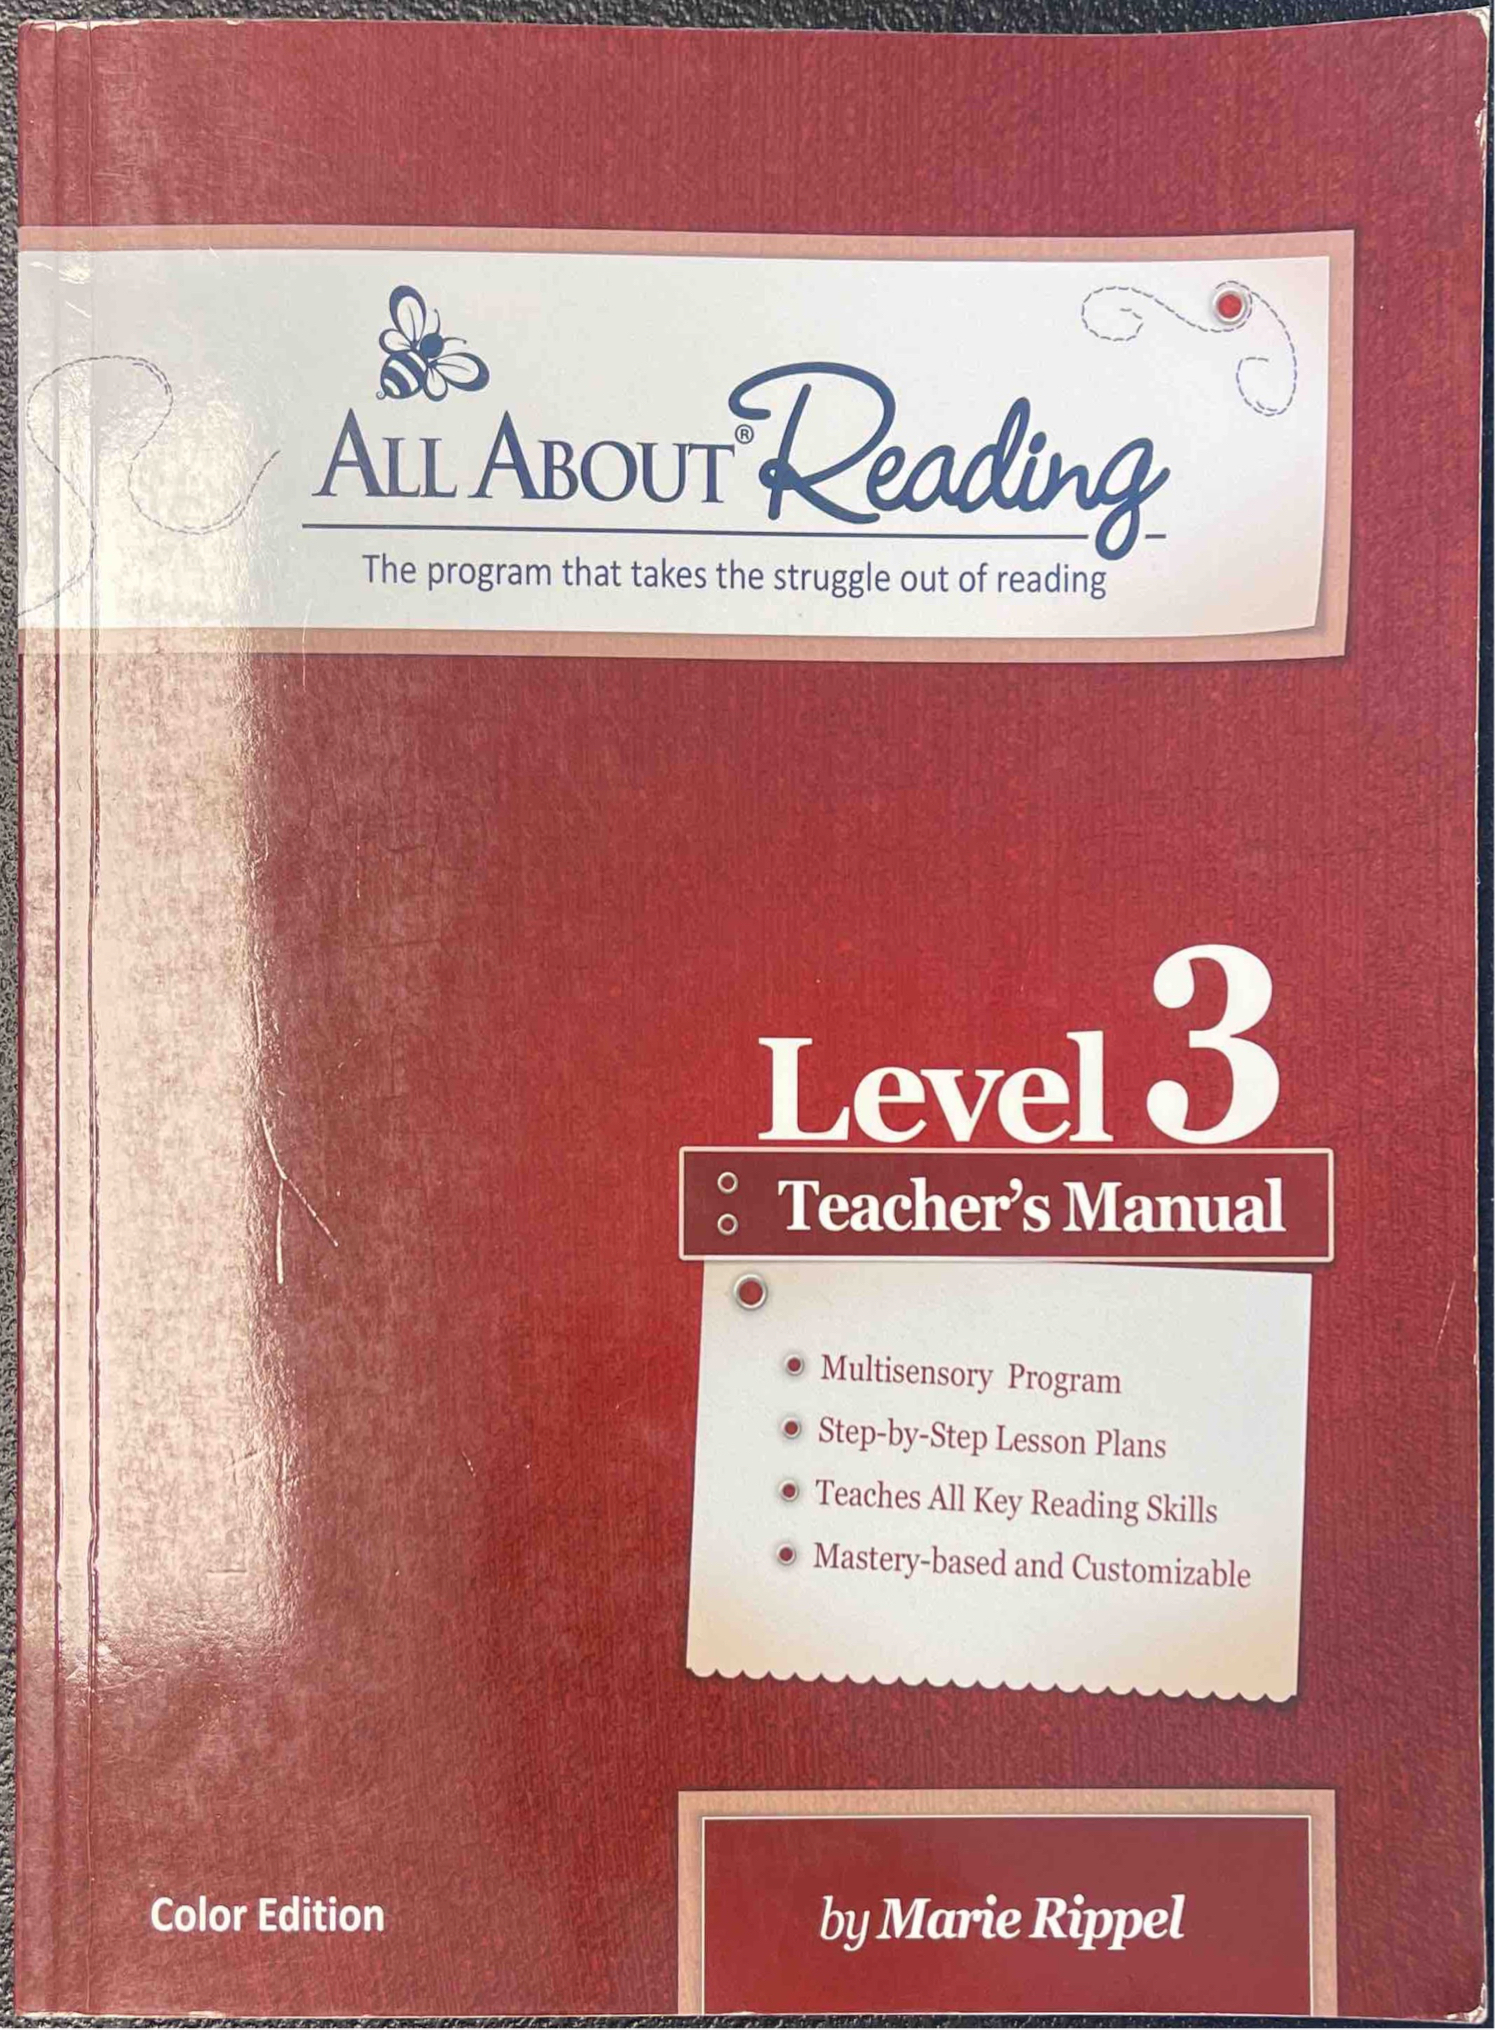 All About Reading Level 3 Teacher's Manual